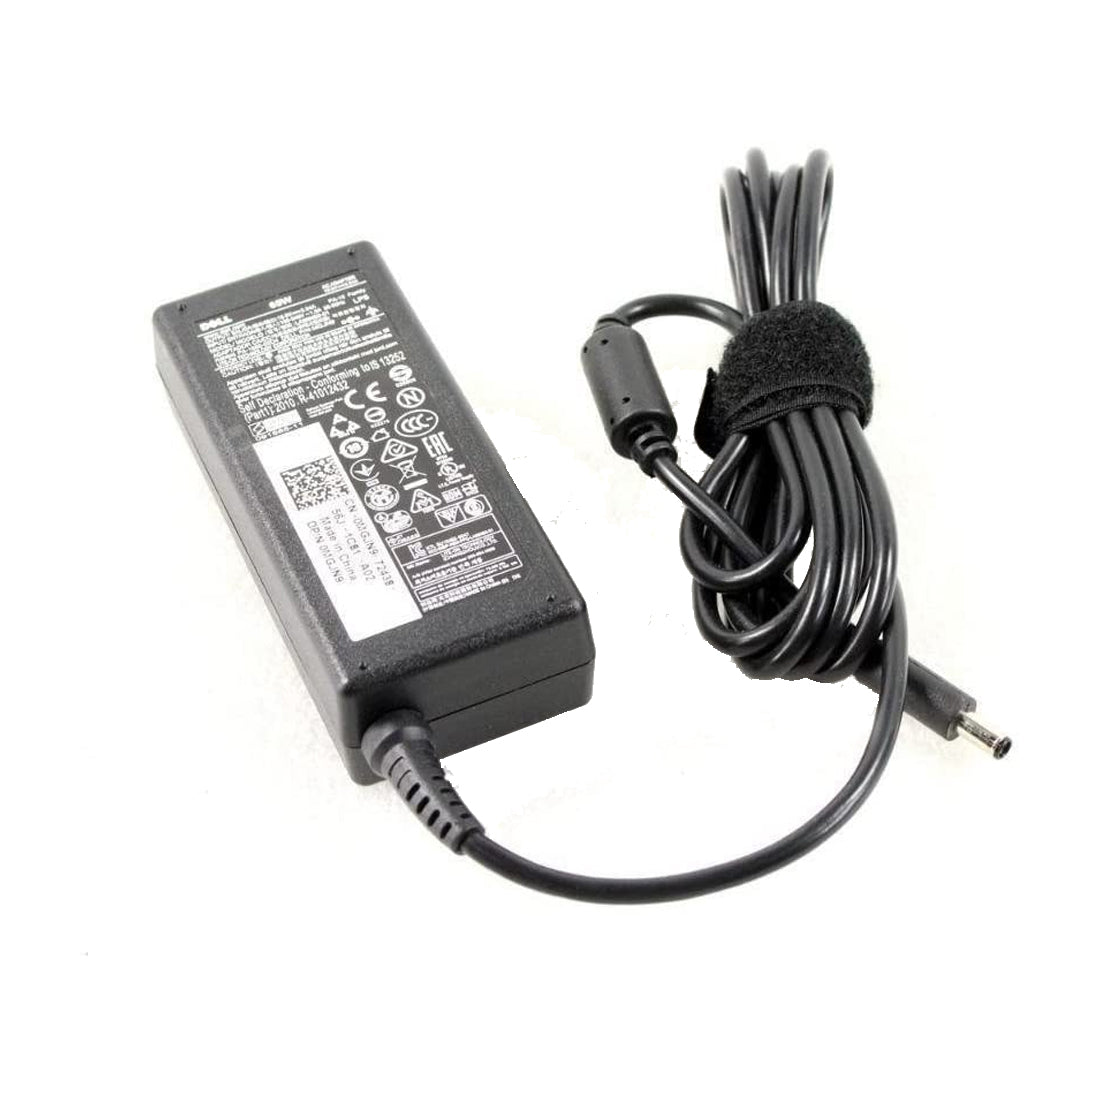 Dell Original 65W 19.5V 4.5mm Pin Laptop Charger Adapter for OptiPlex 7050 With Power Cord